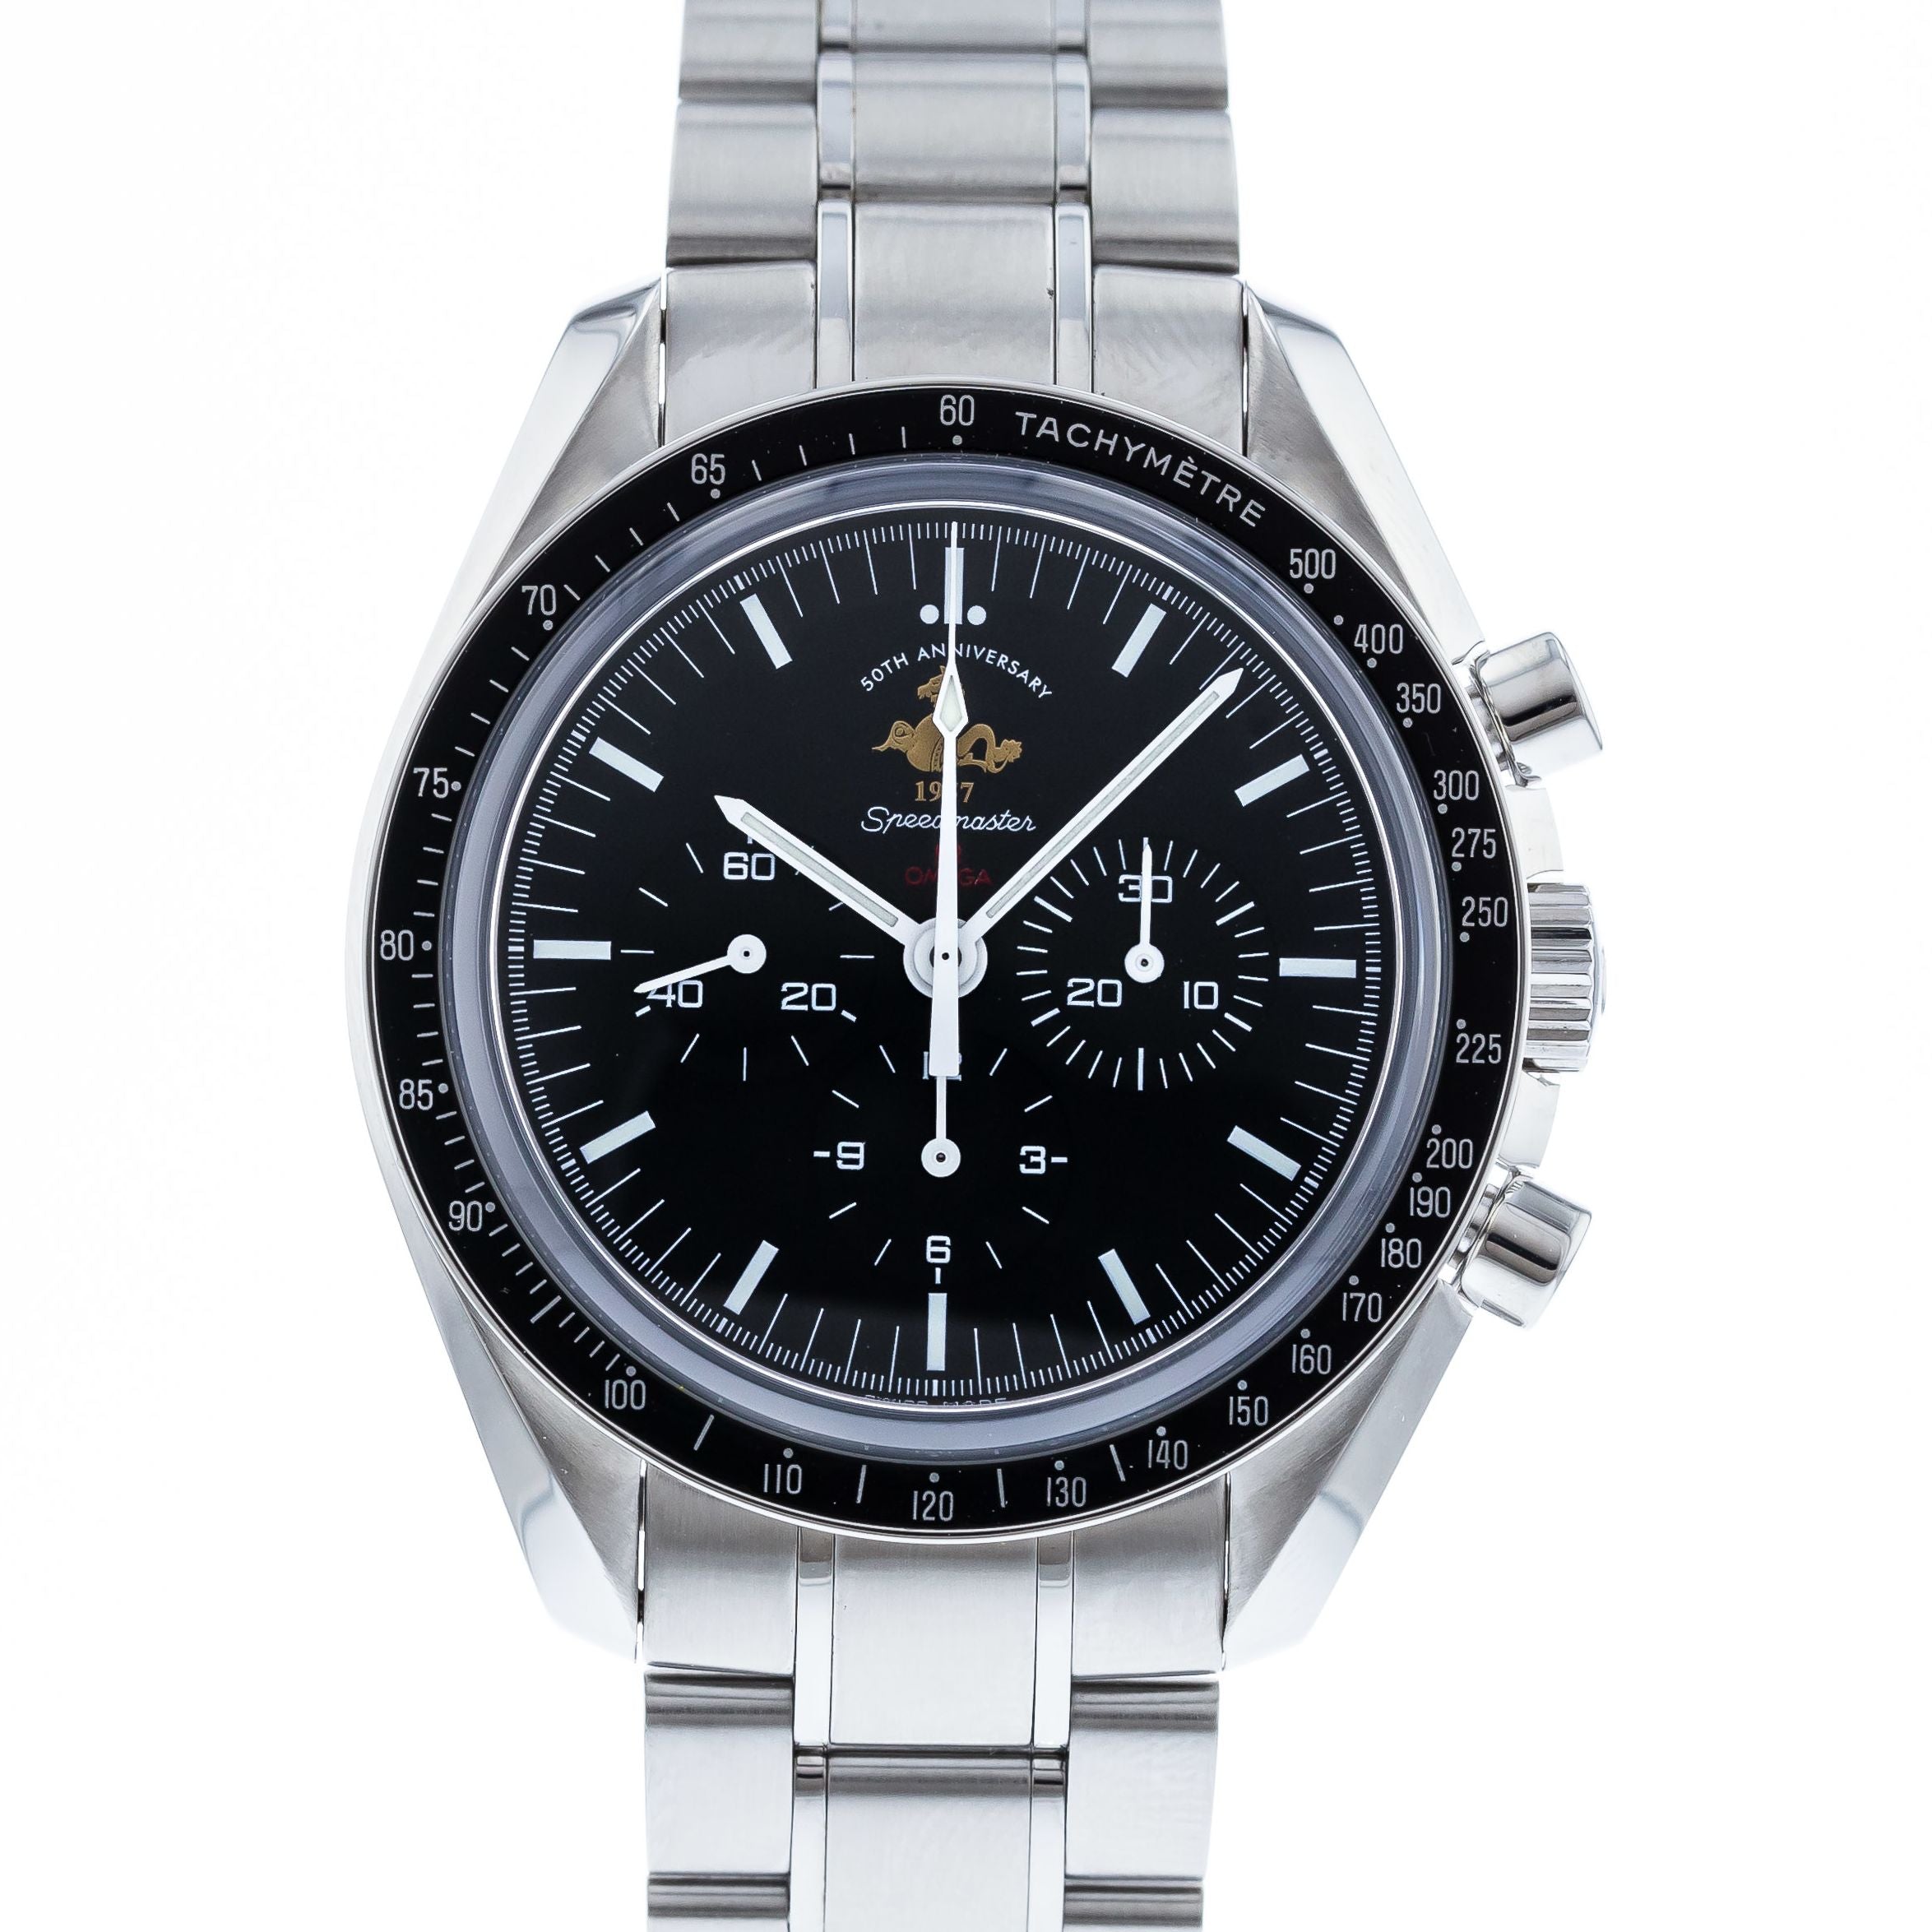 Authentic Used OMEGA Speedmaster Moonwatch Anniversary Limited Series ...